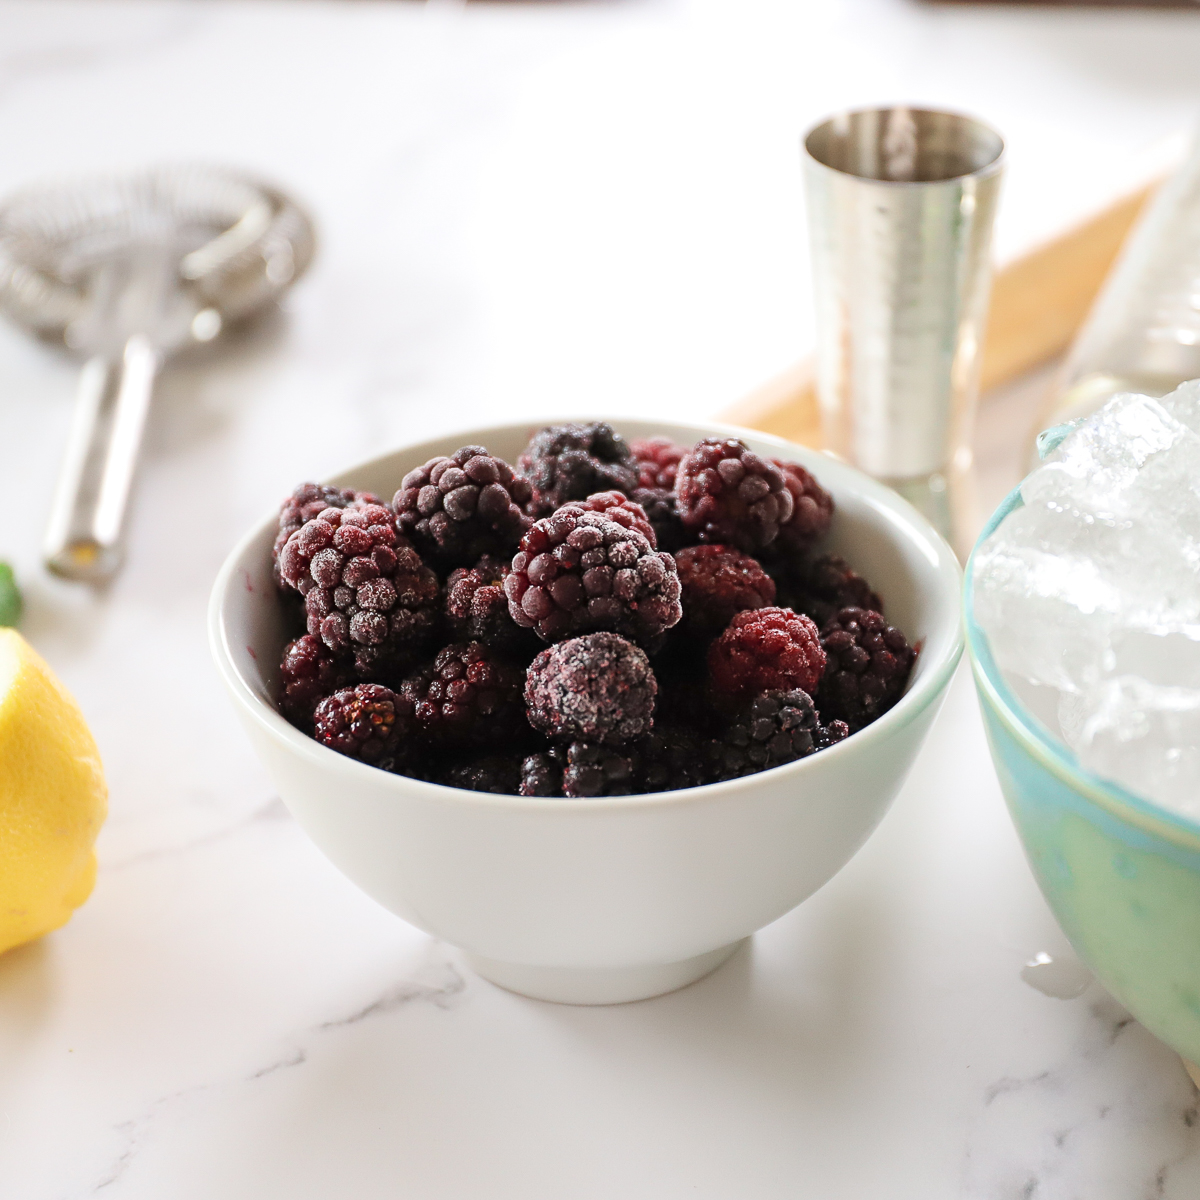 A white bowl of frosty looking blackberries with ice cubes, a jigger and cocktail strainer on the table around them.